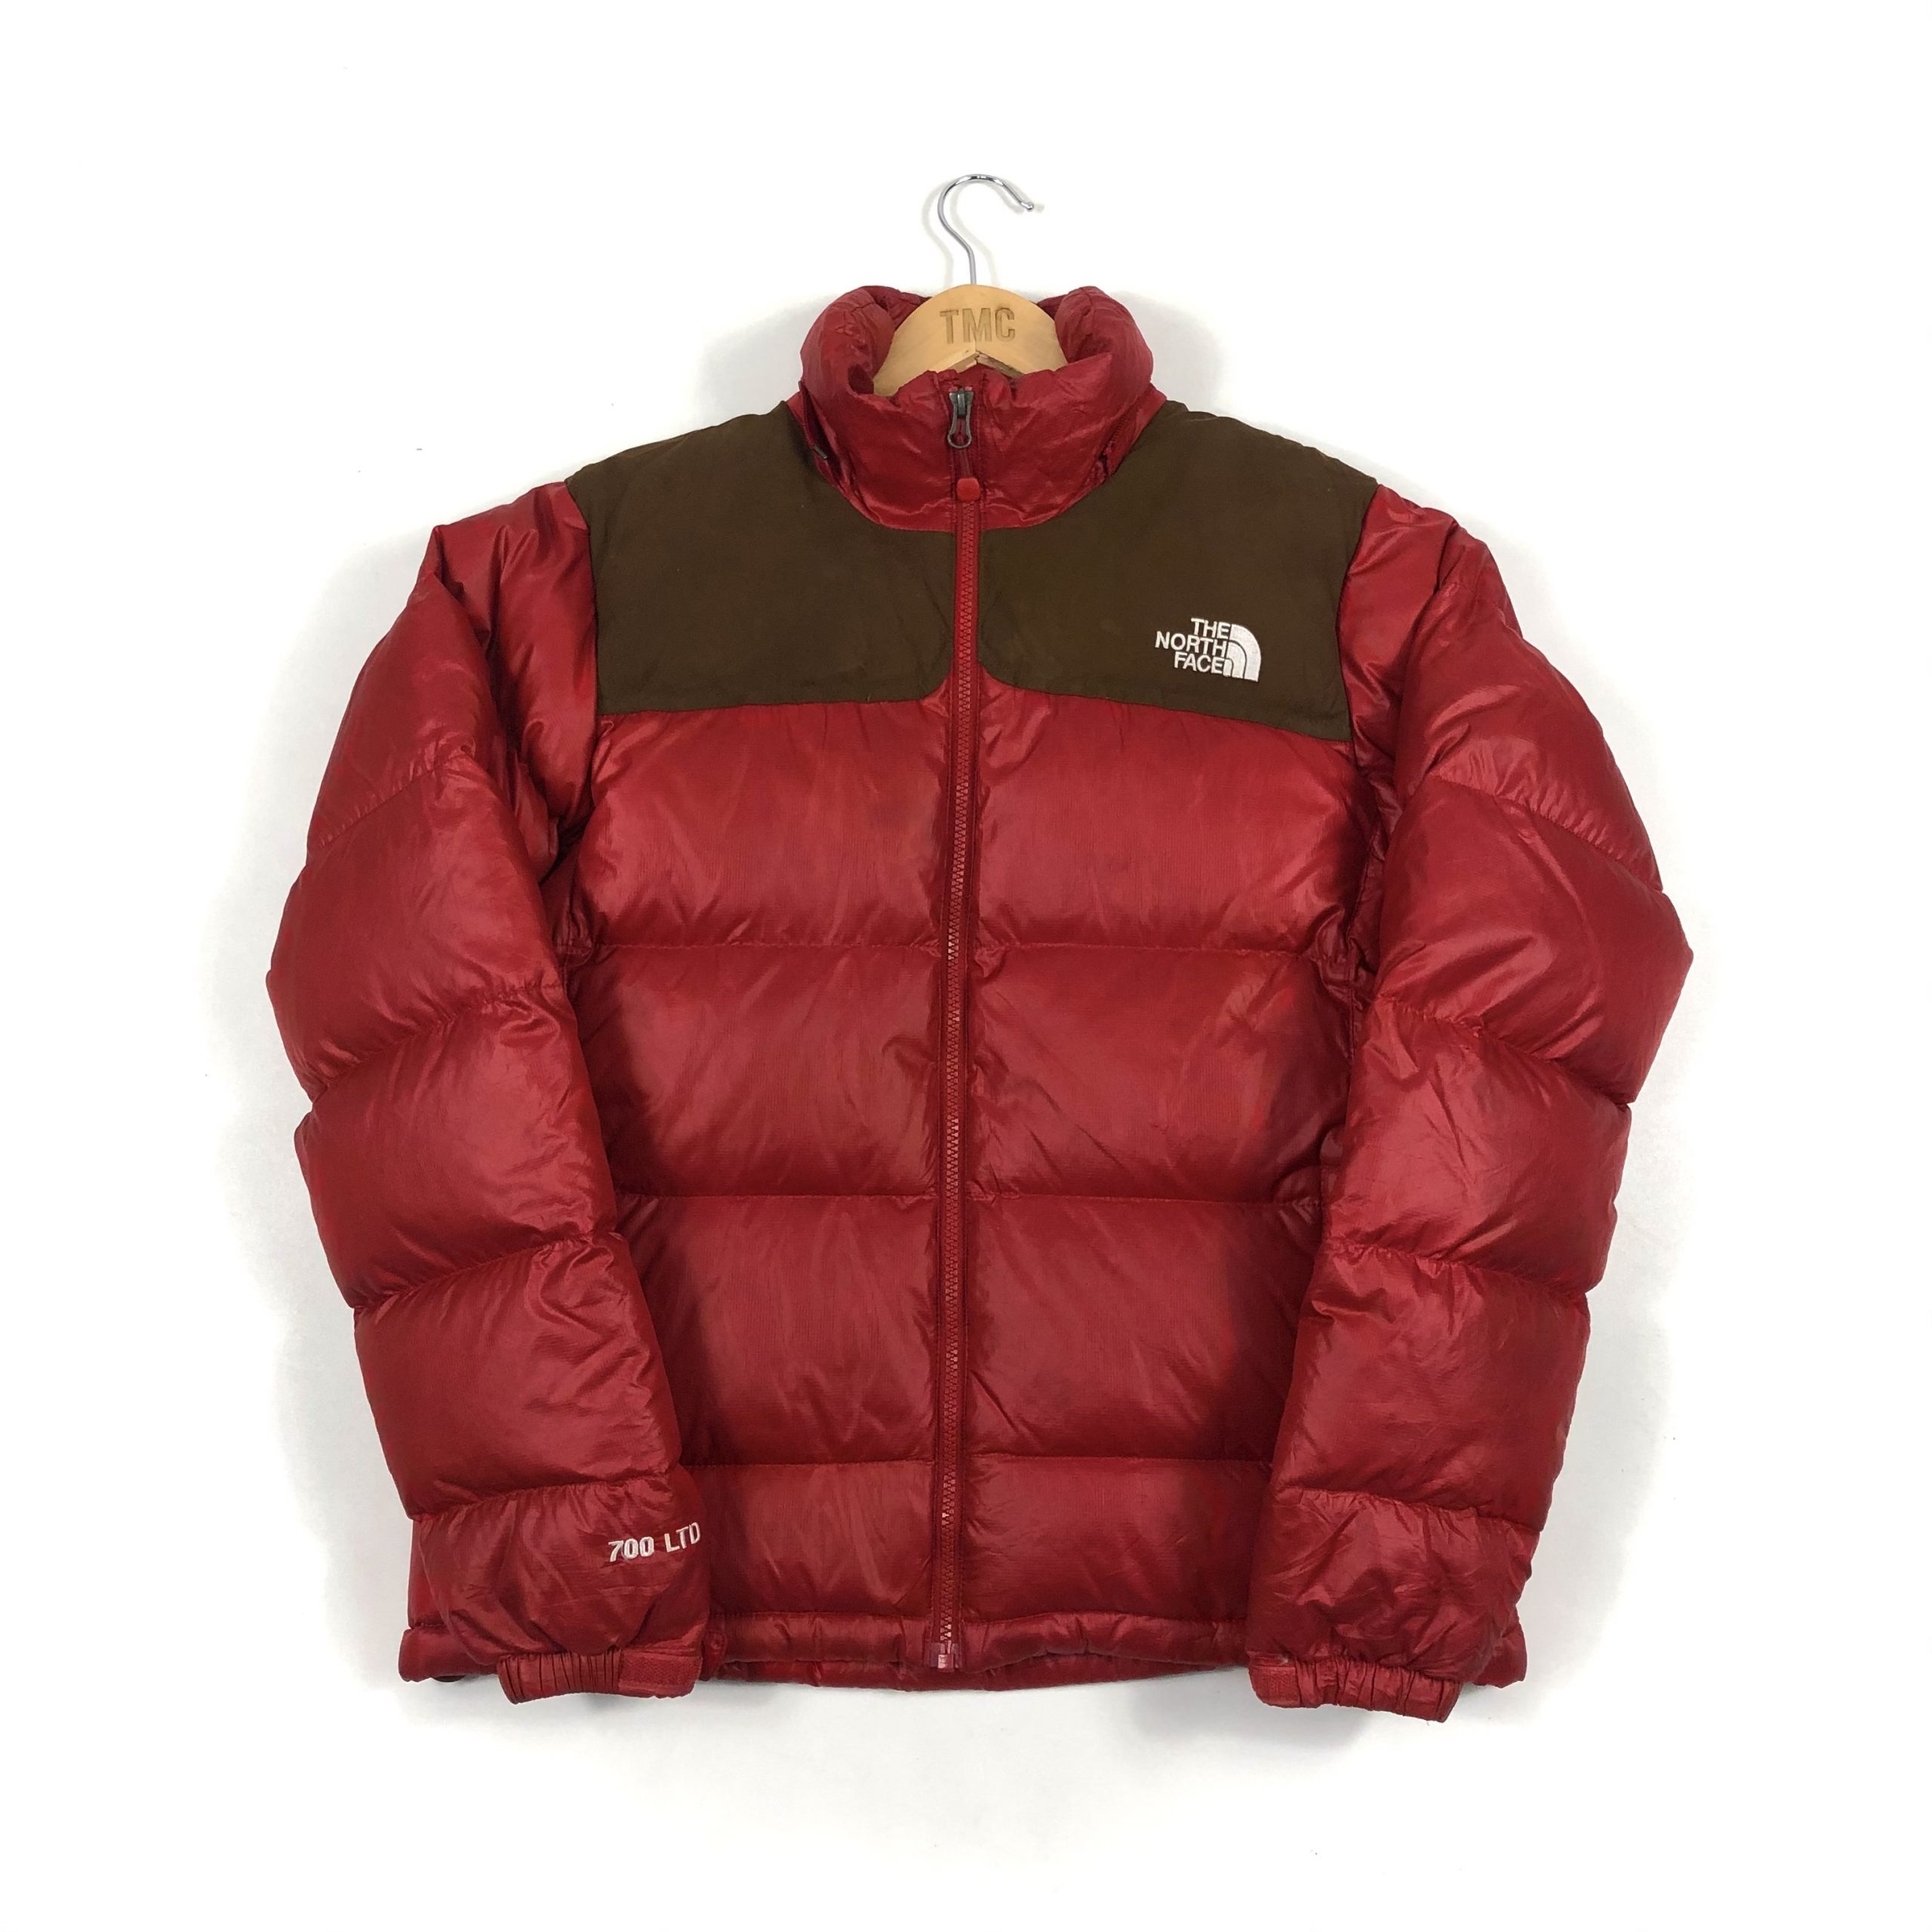 Women’s The North Face Nuptse 700 Puffer Jacket - Red - M - TMC Vintage